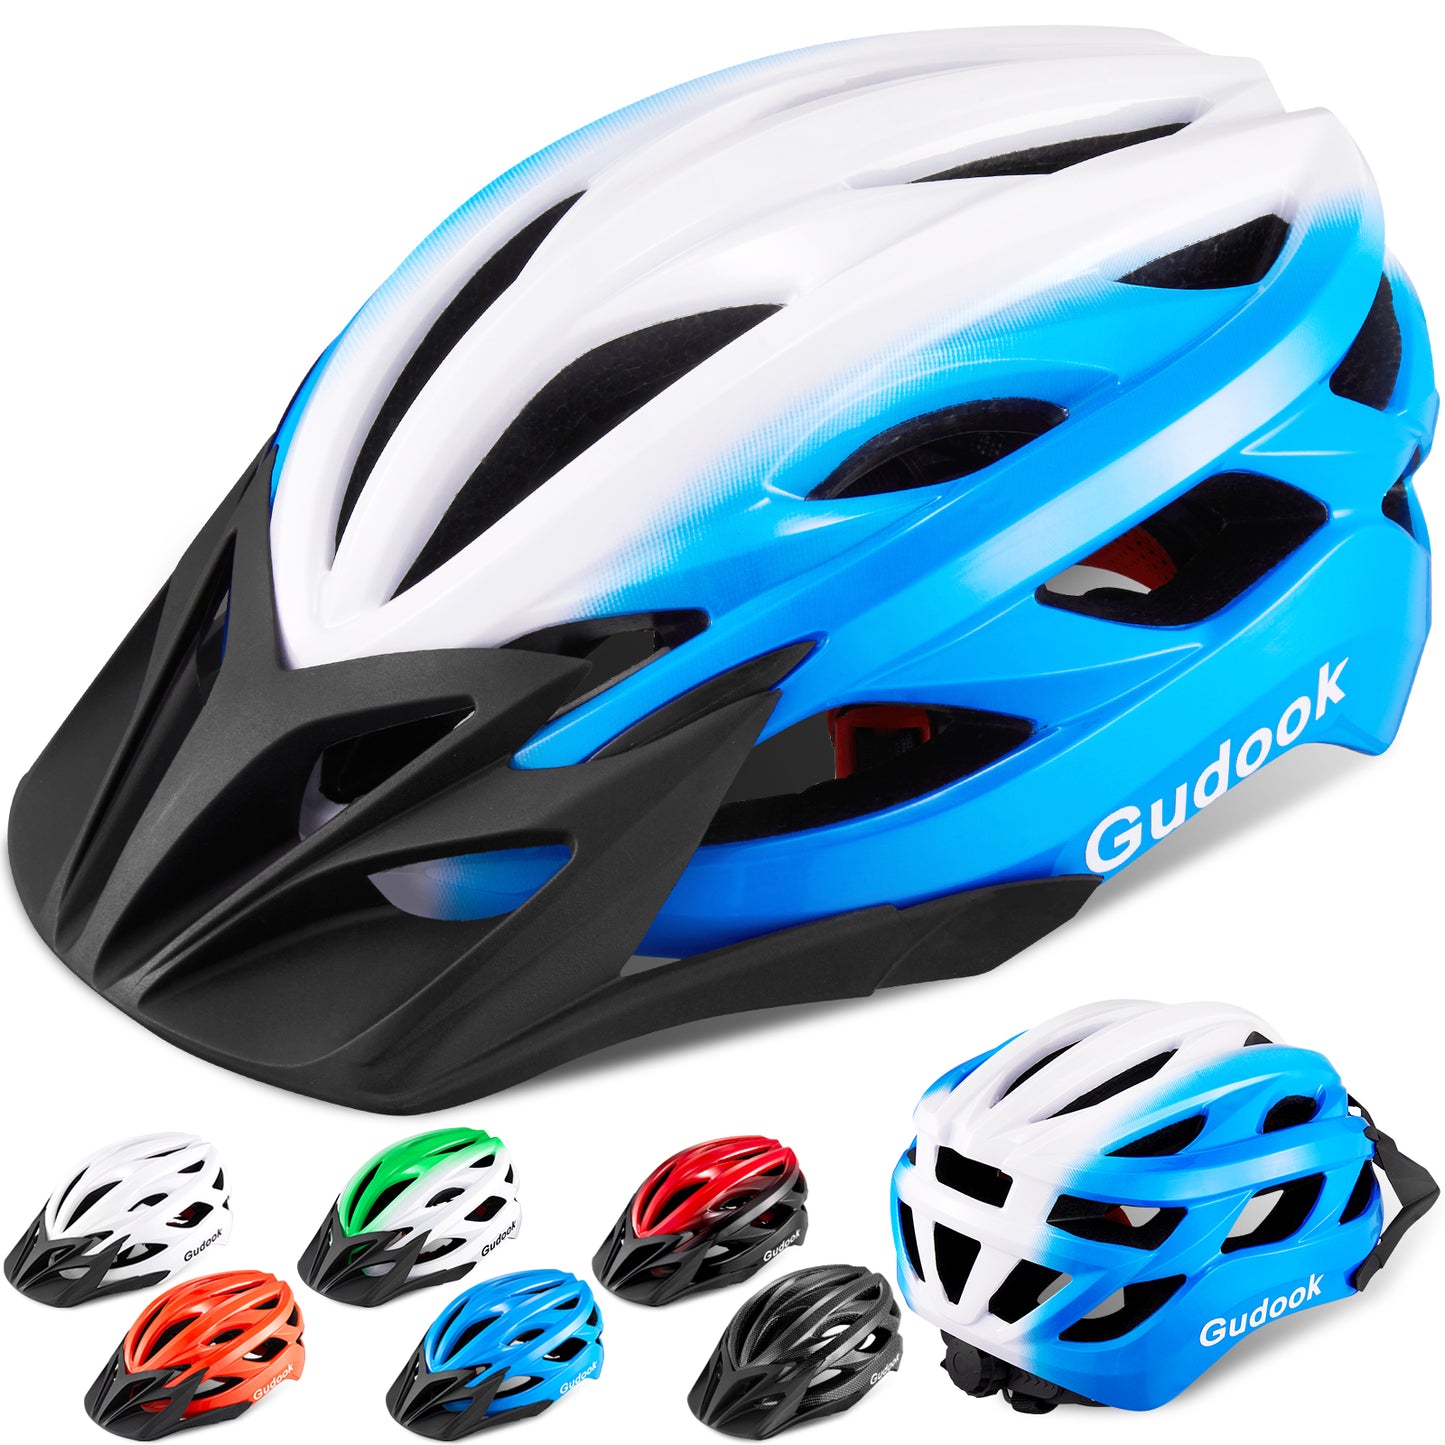 Gudook Bicycle Helmet with Detachable Visor KY-055